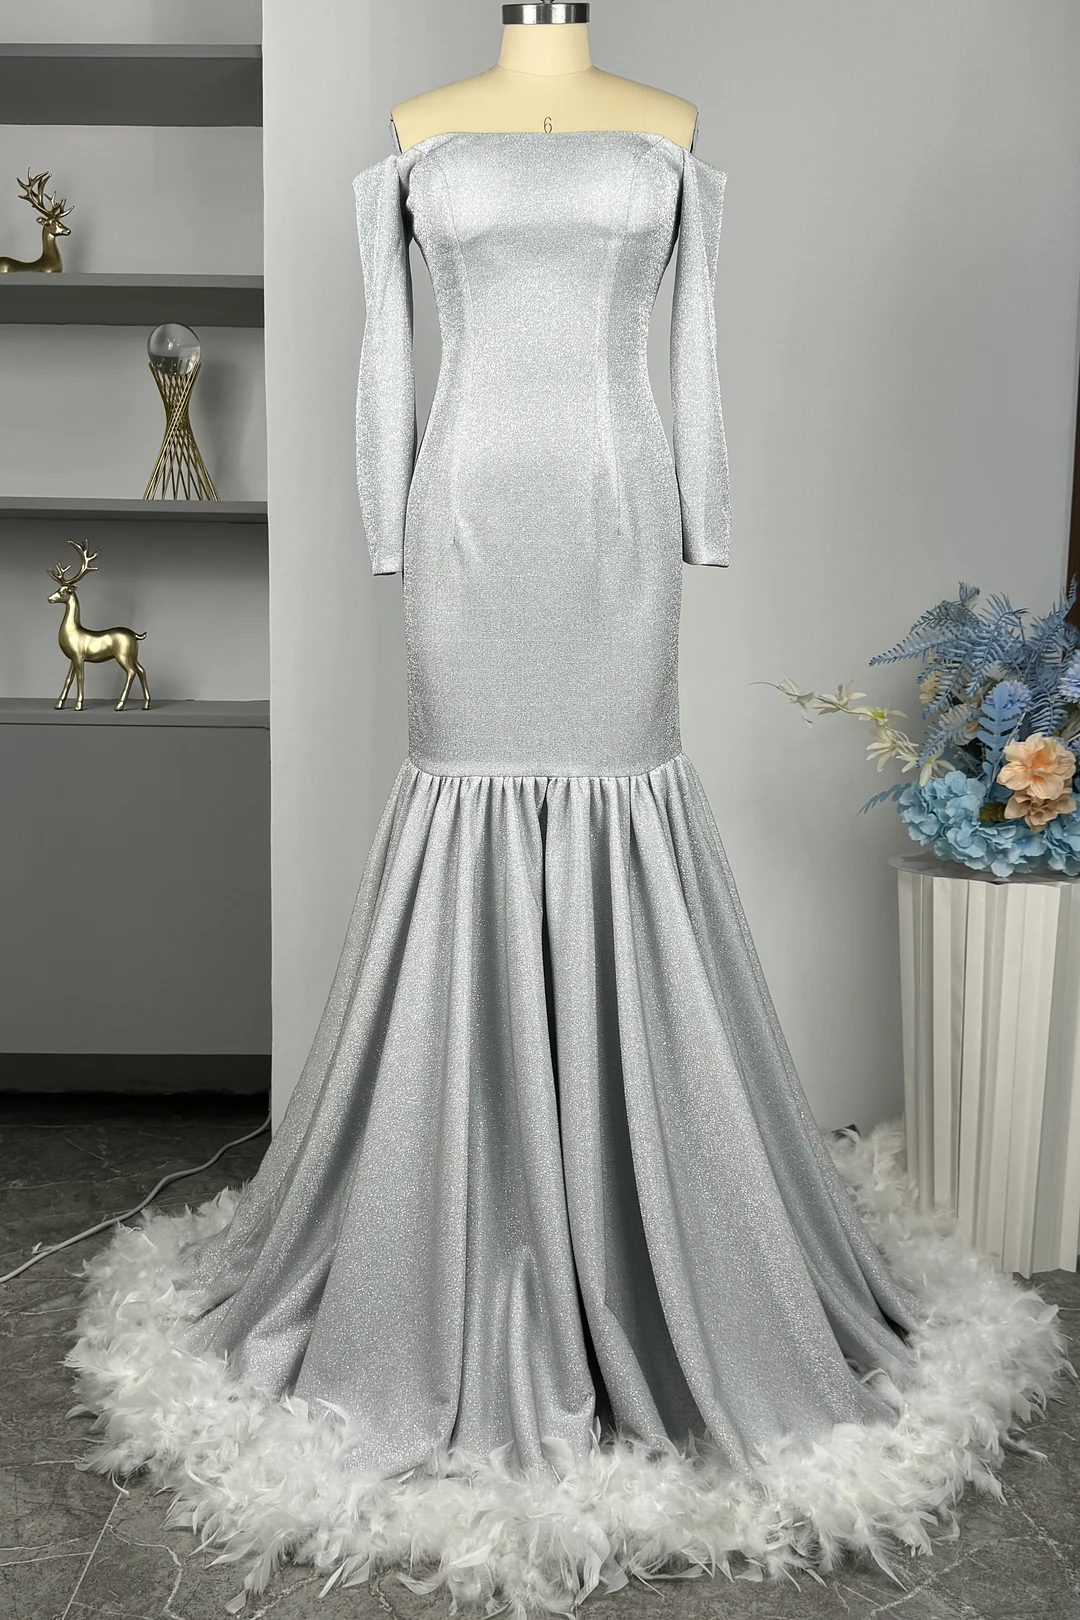 Okdais Long Prom Dress Sequins Silver Feather Long Sleeves YL0293